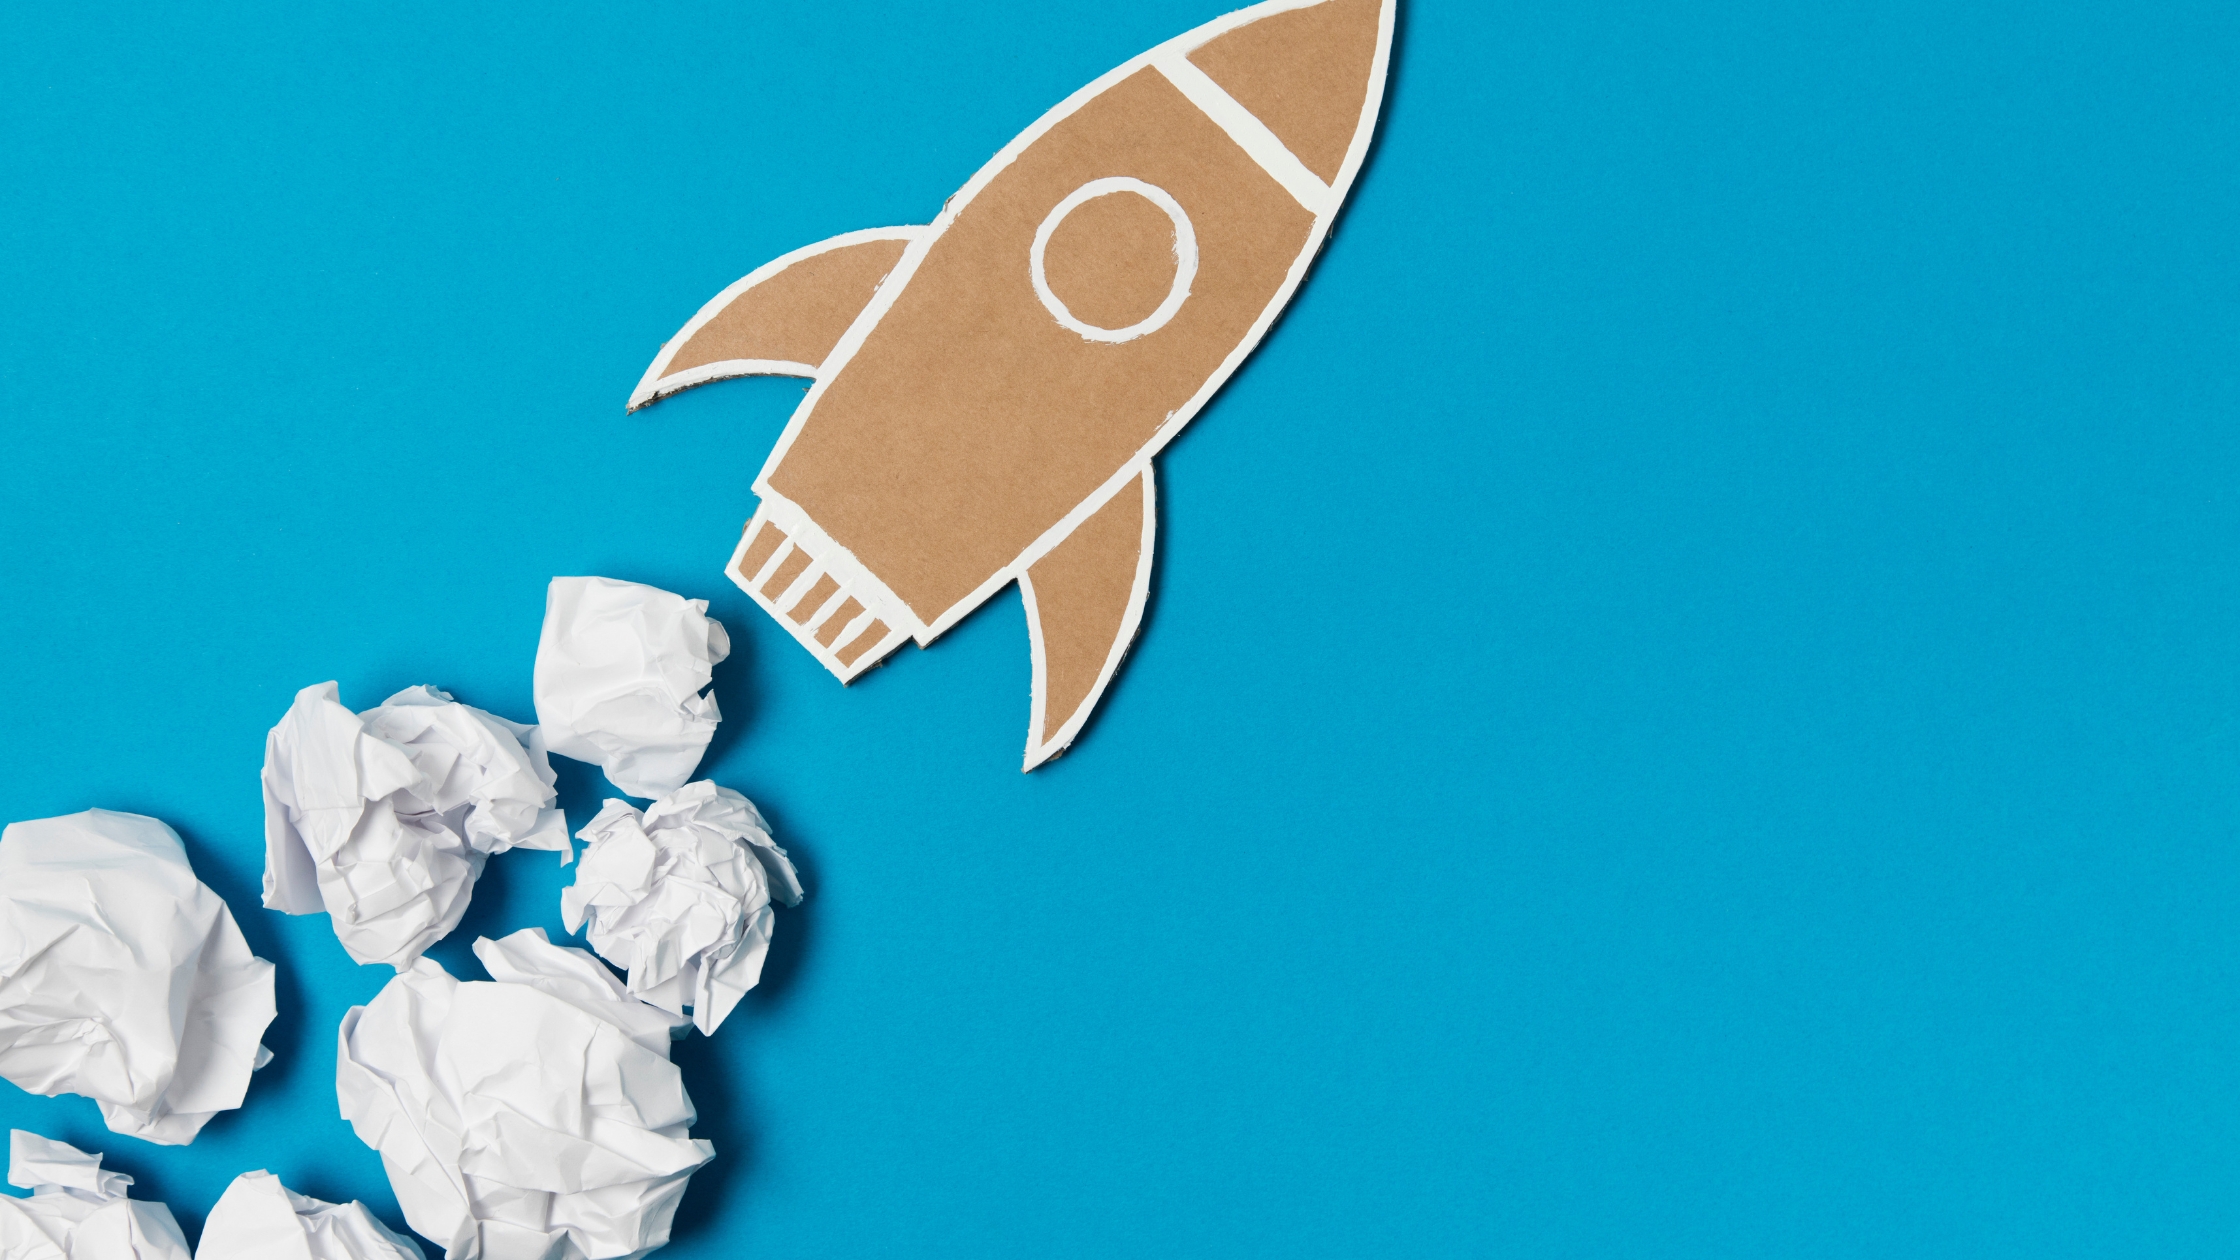 Collect Debt Faster: Cardboard rocket illustration flying through crumpled white paper clouds, symbolizing overcoming debt collection challenges. The Baker Group debt collection services.